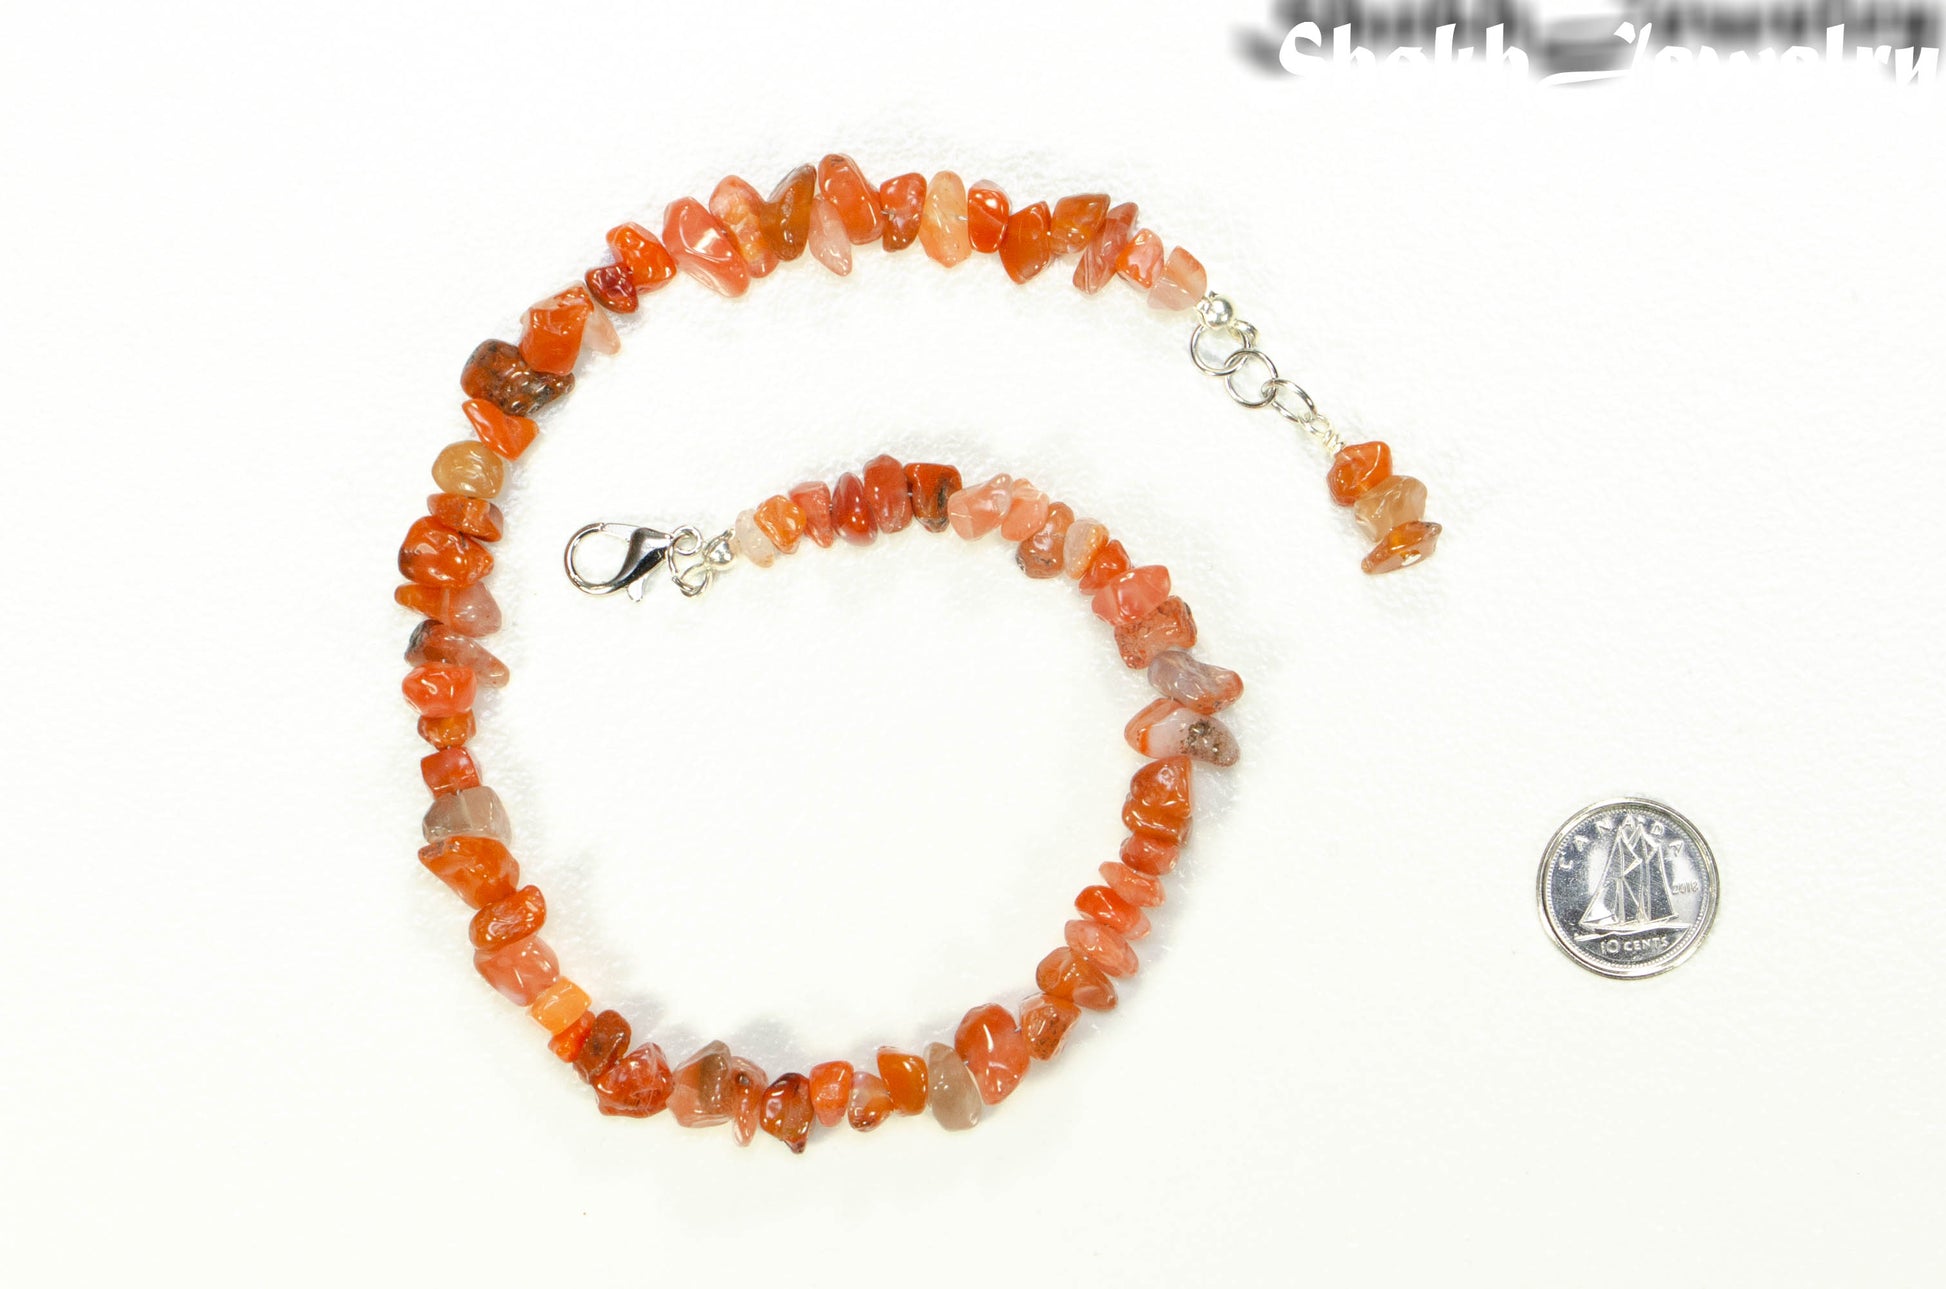 Natural Carnelian Crystal Chip Choker Necklace beside a dime